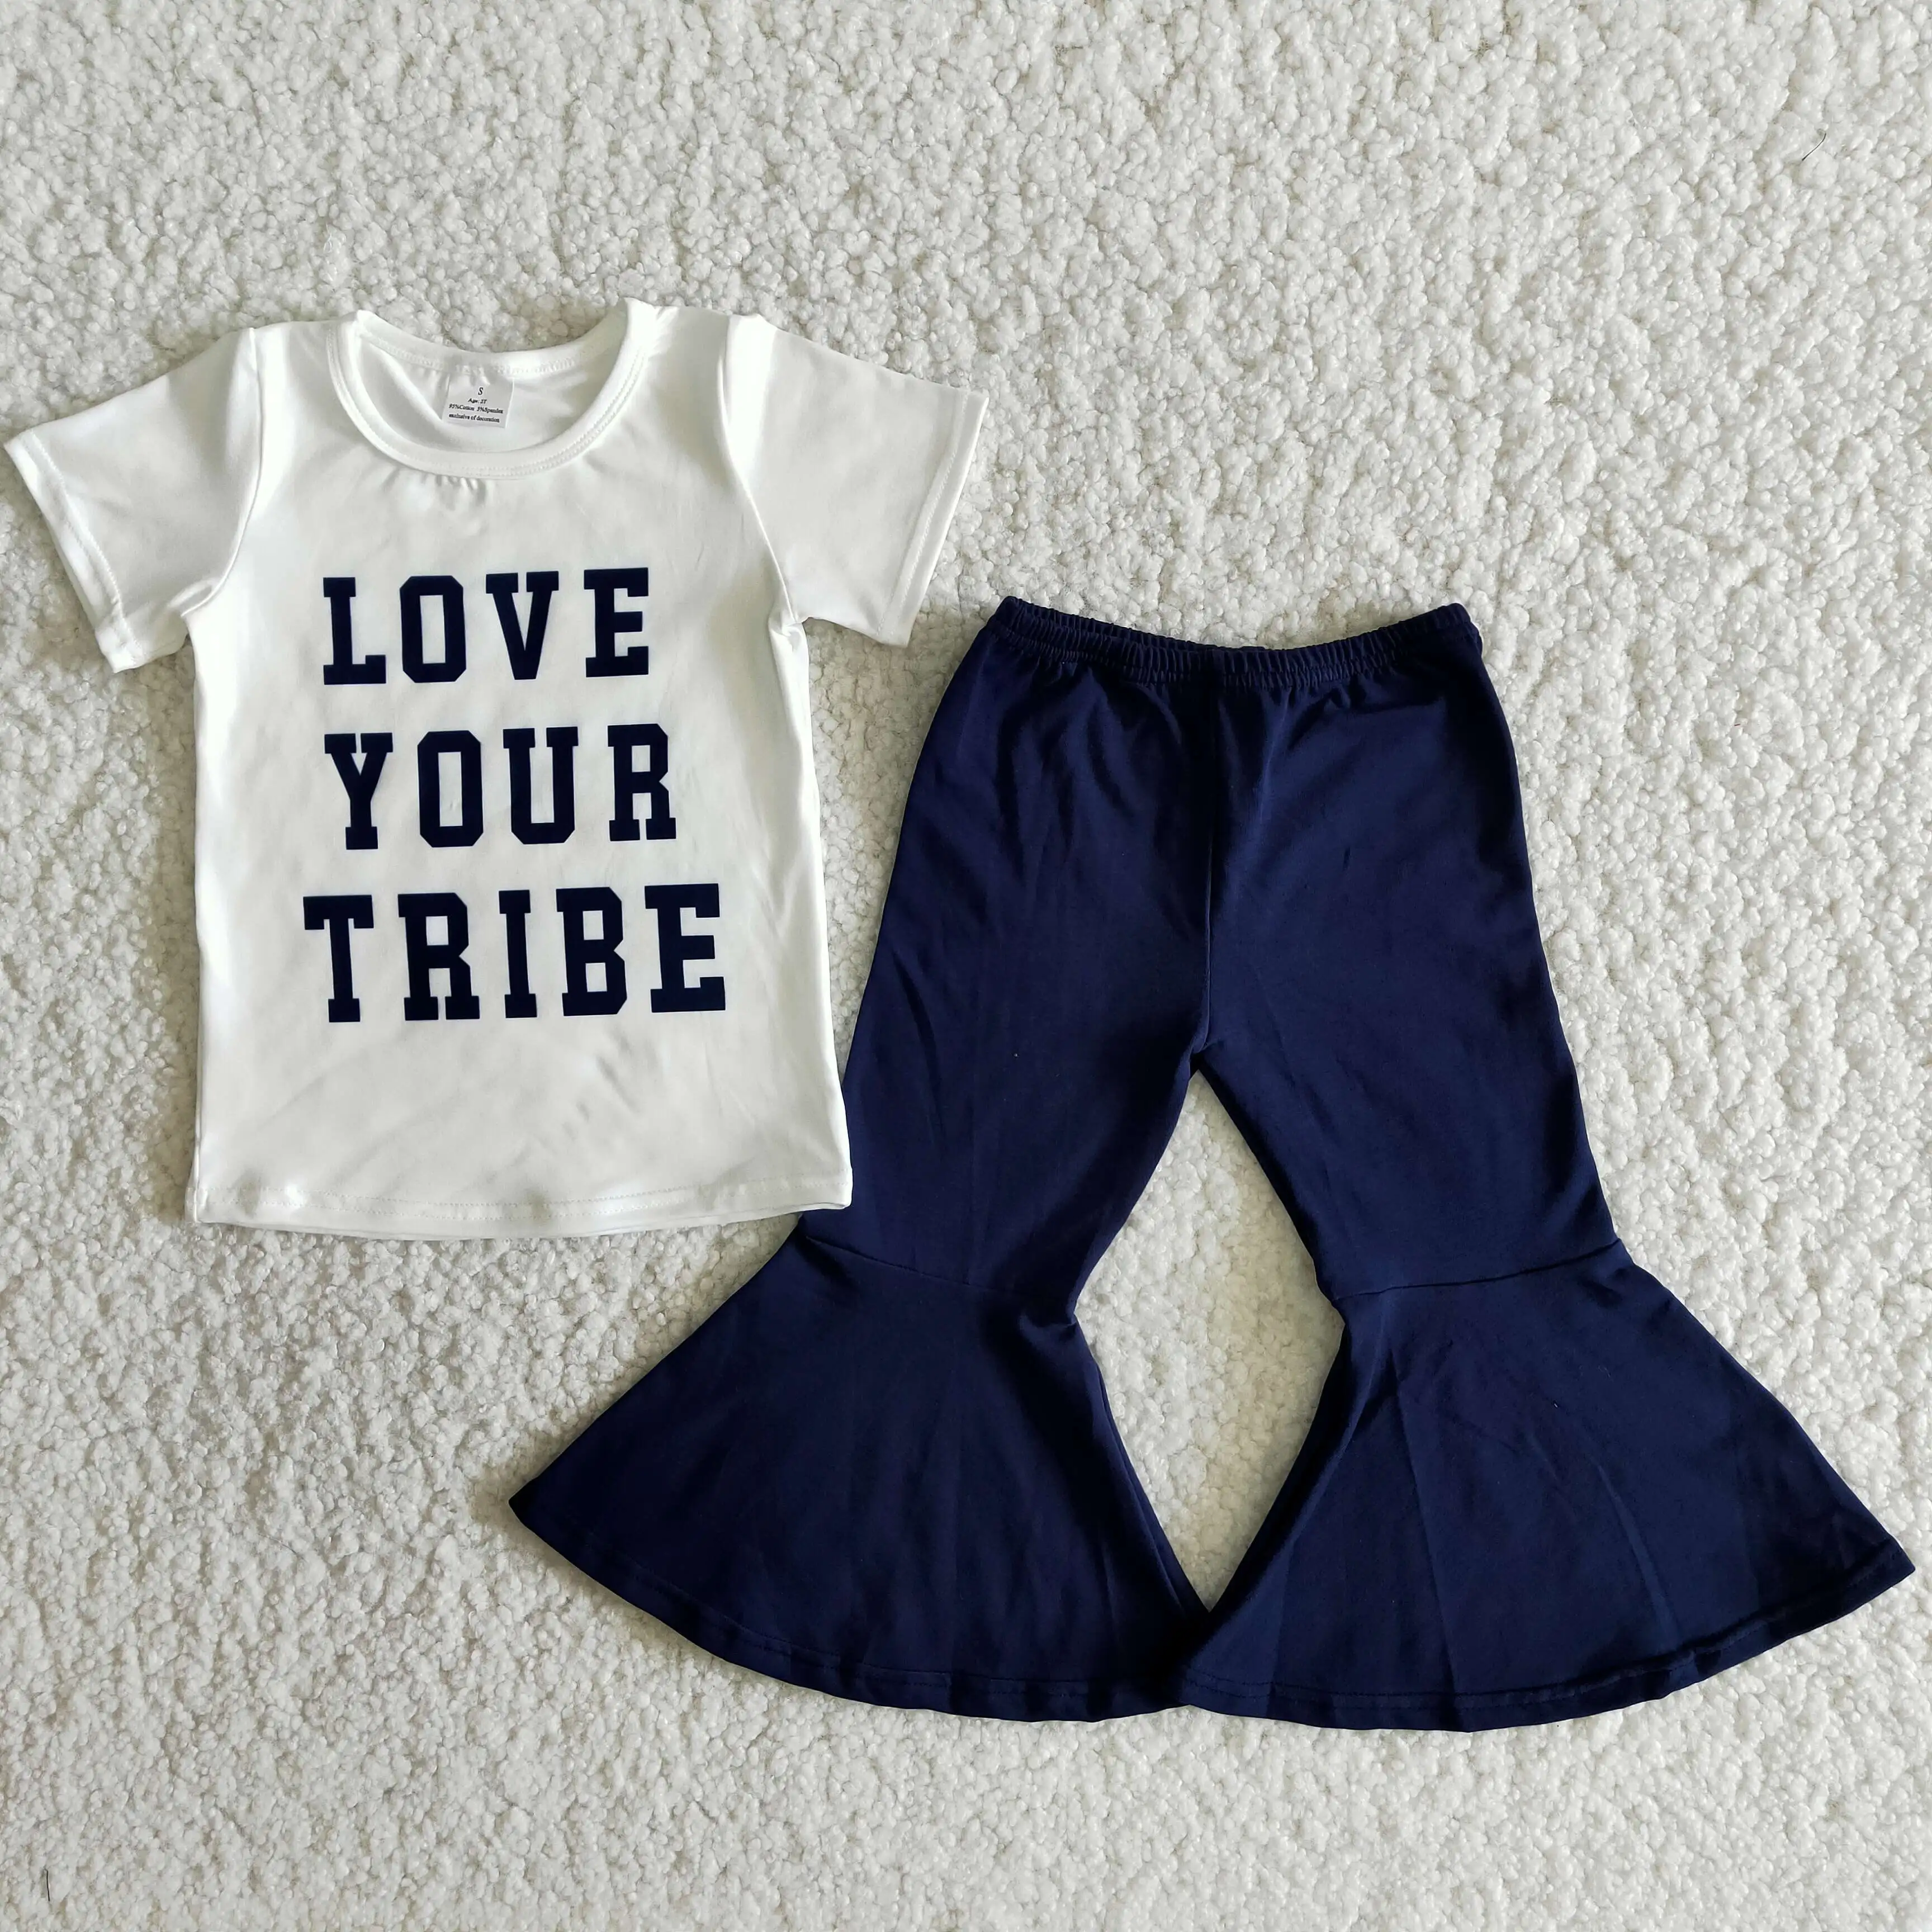 

Love your tribe kids letter T-shirt short-sleeved kids clothes navy blue bell bottom trousers fashion kids clothes wholesale